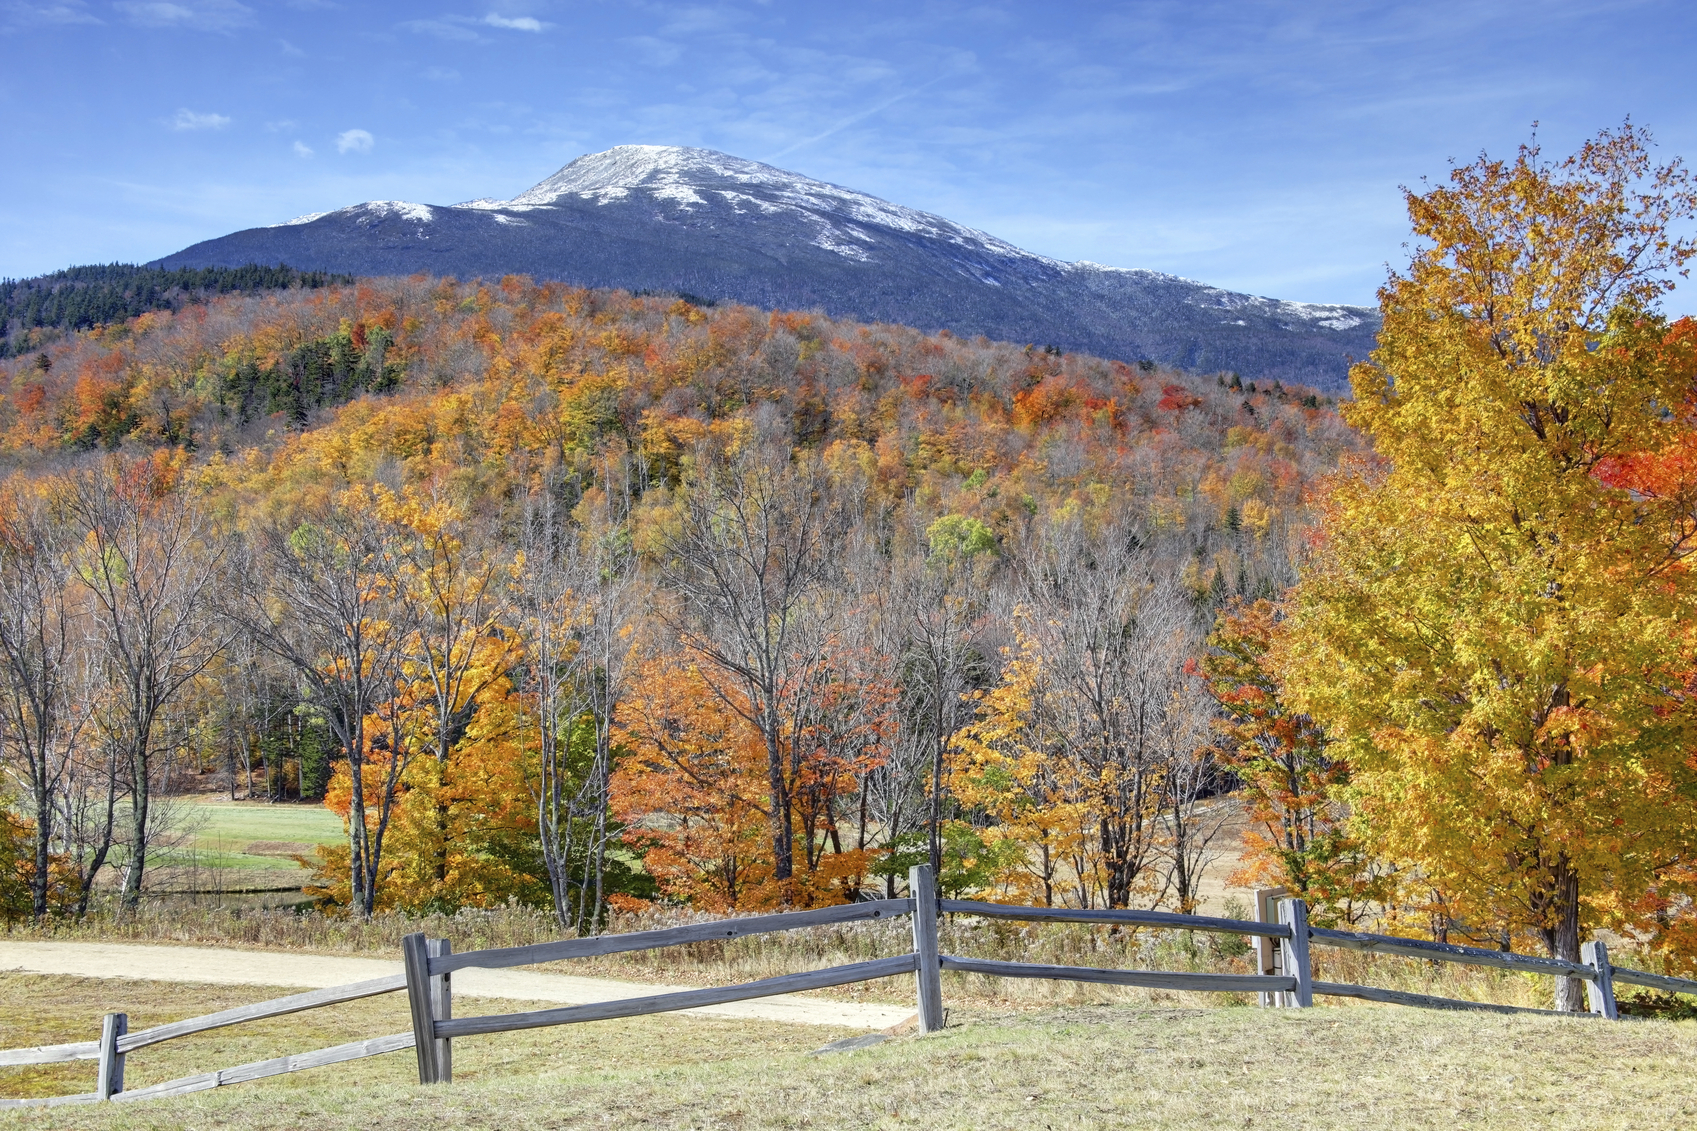 Snowcapped mountains in the White Mountains National Forest in New Hampshire during the autumn foliage season. Photo taken during the peak fall foliage season. New Hampshire is one of New England's most popular fall foliage destinations bringing out some of the best foliage in the United States